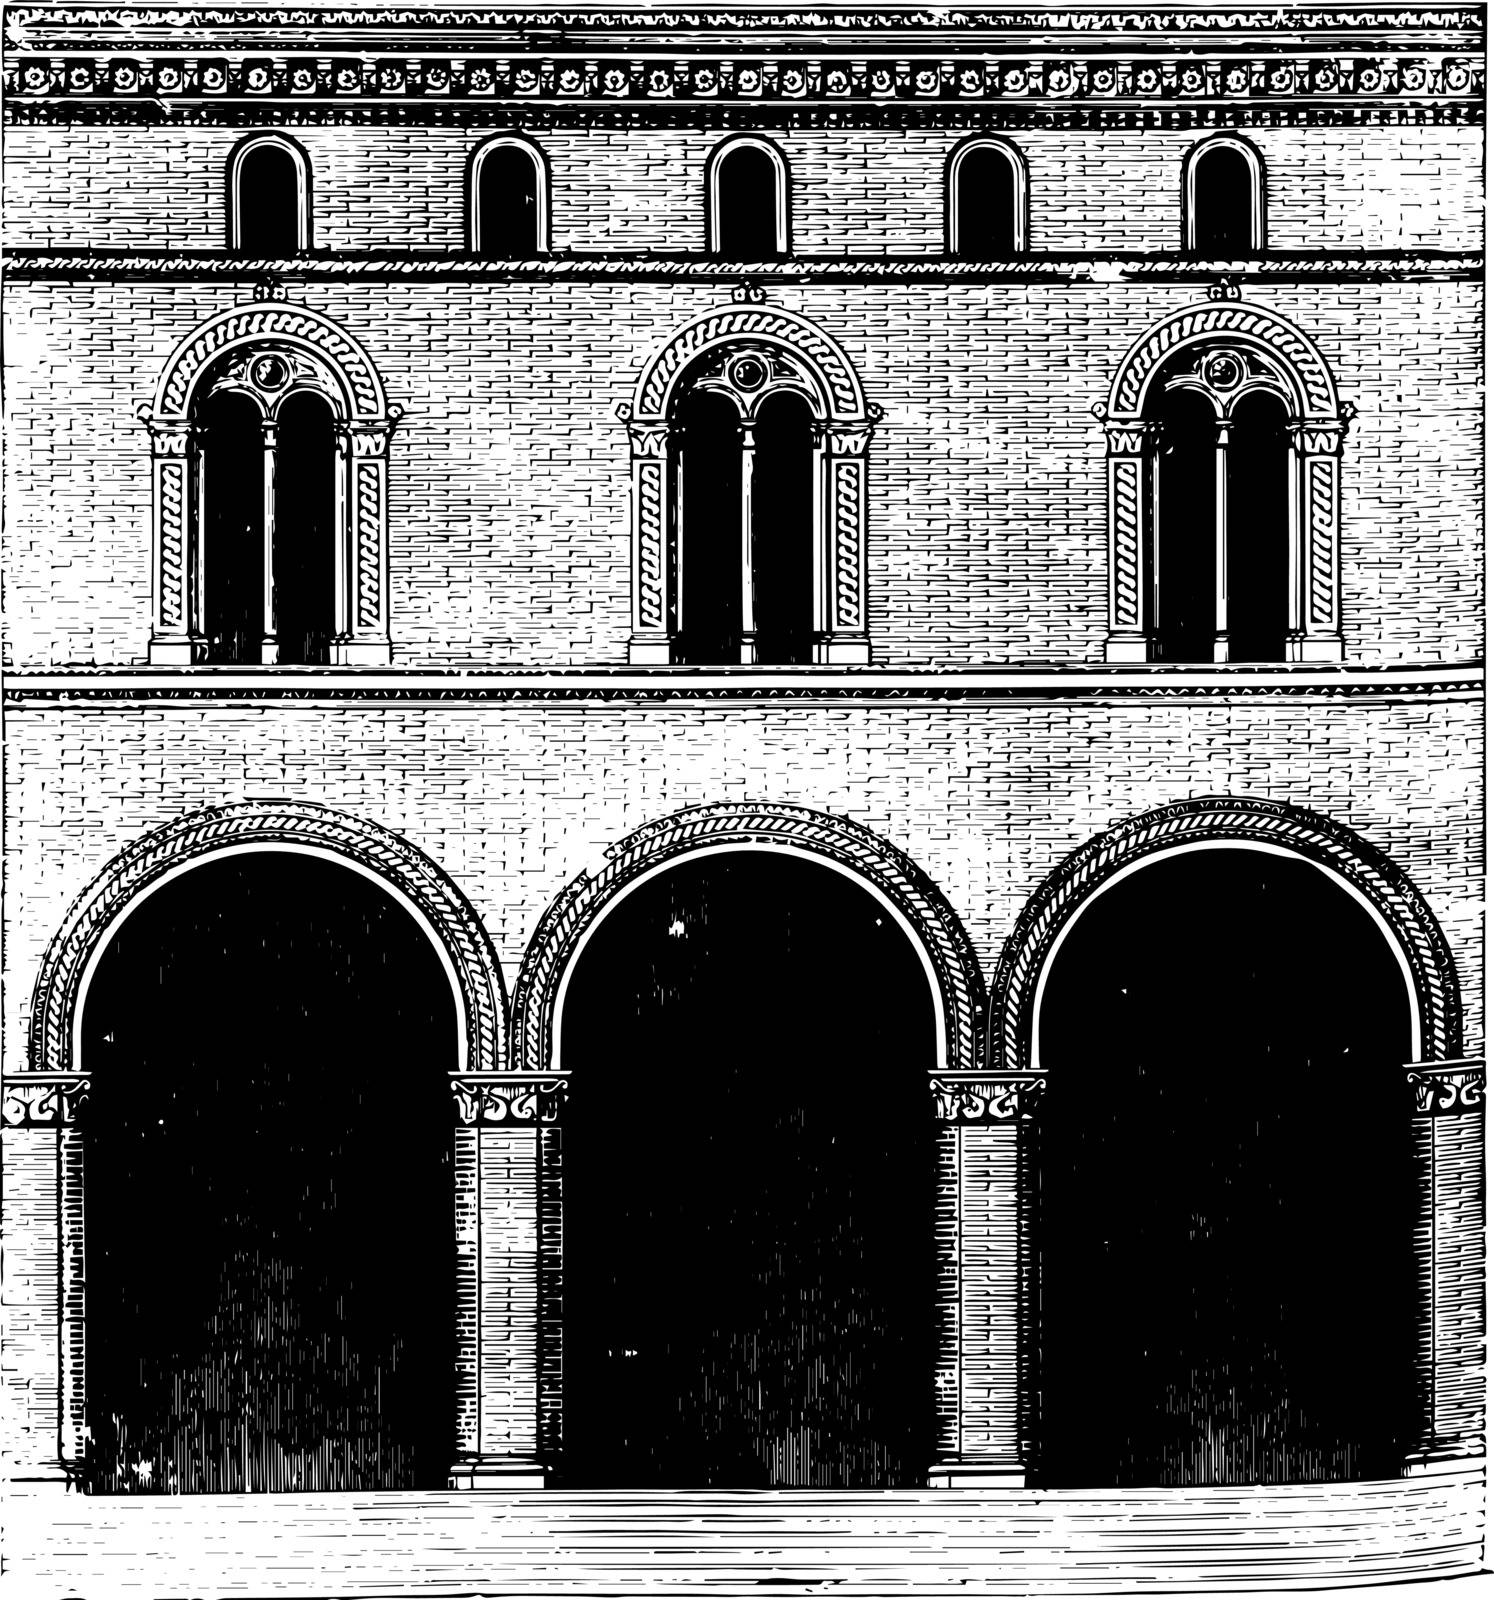 Façade of a Palace at Bologna the rarity and expensiveness of free to stone an architectural style in brick employed in the foregoing period for churches vintage line drawing or engraving illustration.